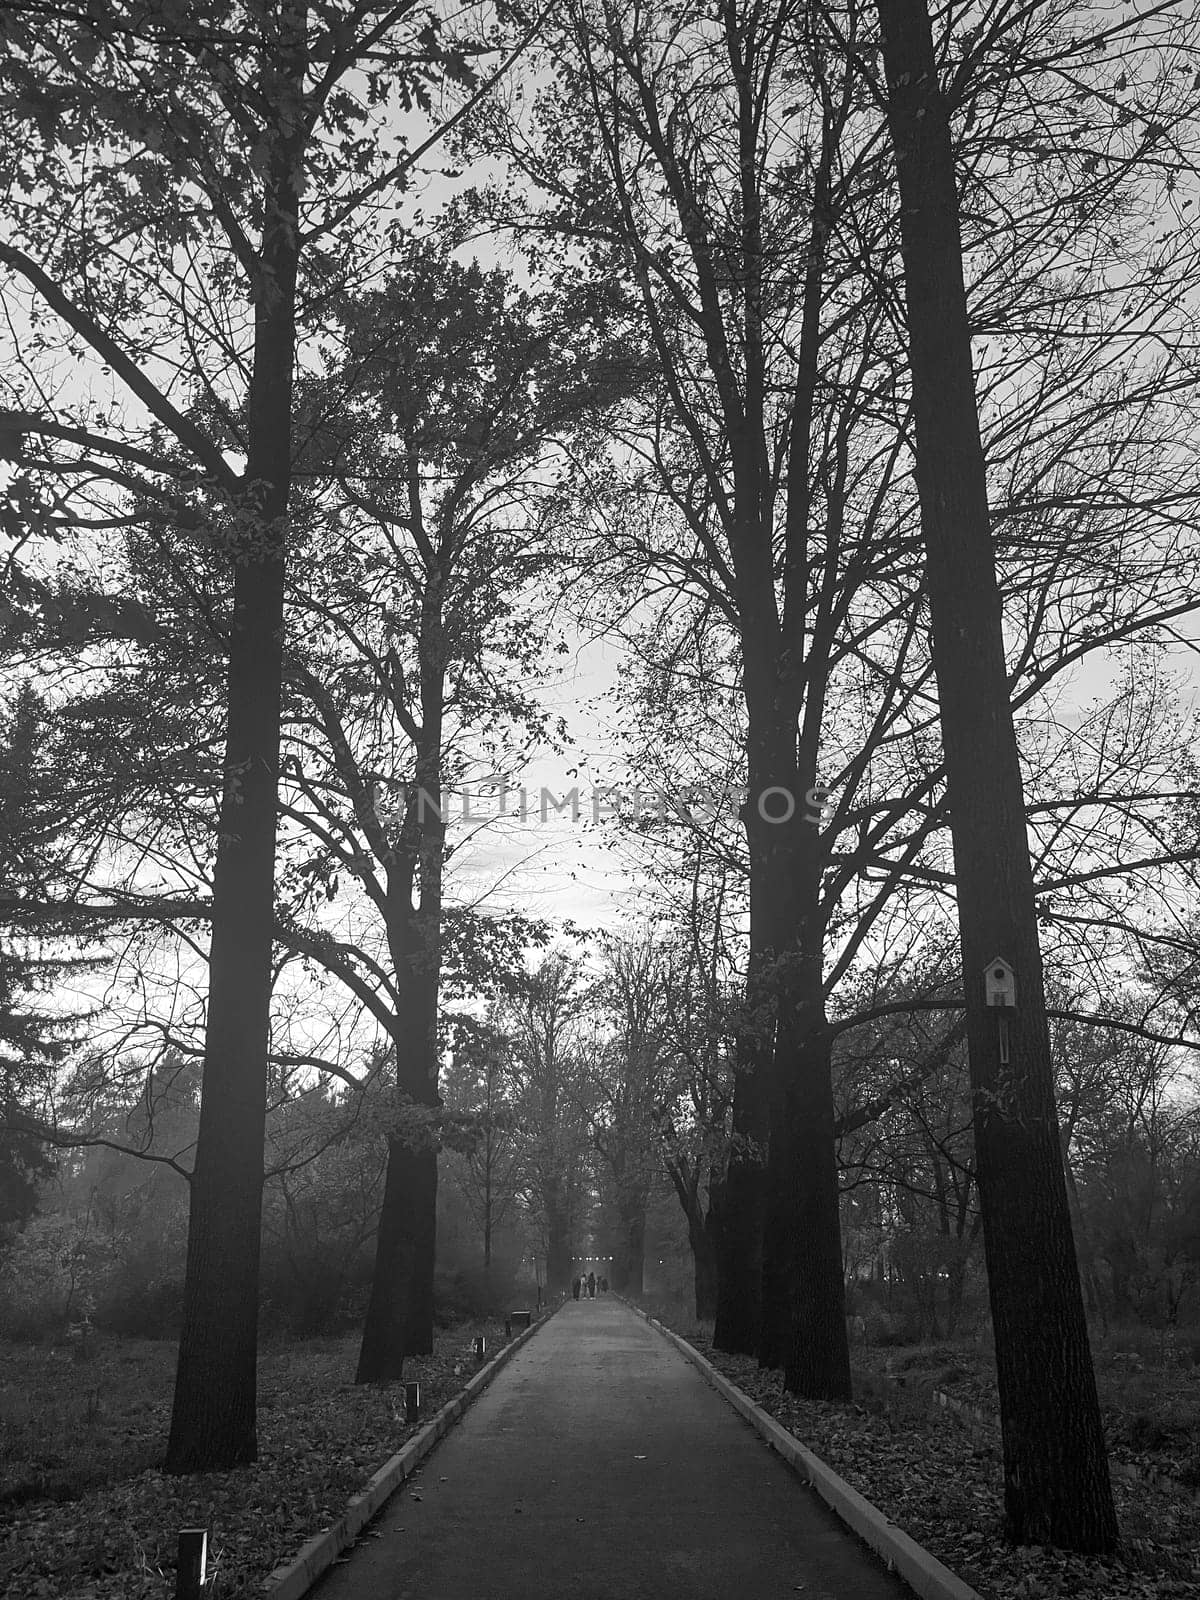 a beautiful walking alley with trees. black and white photo by Pukhovskiy